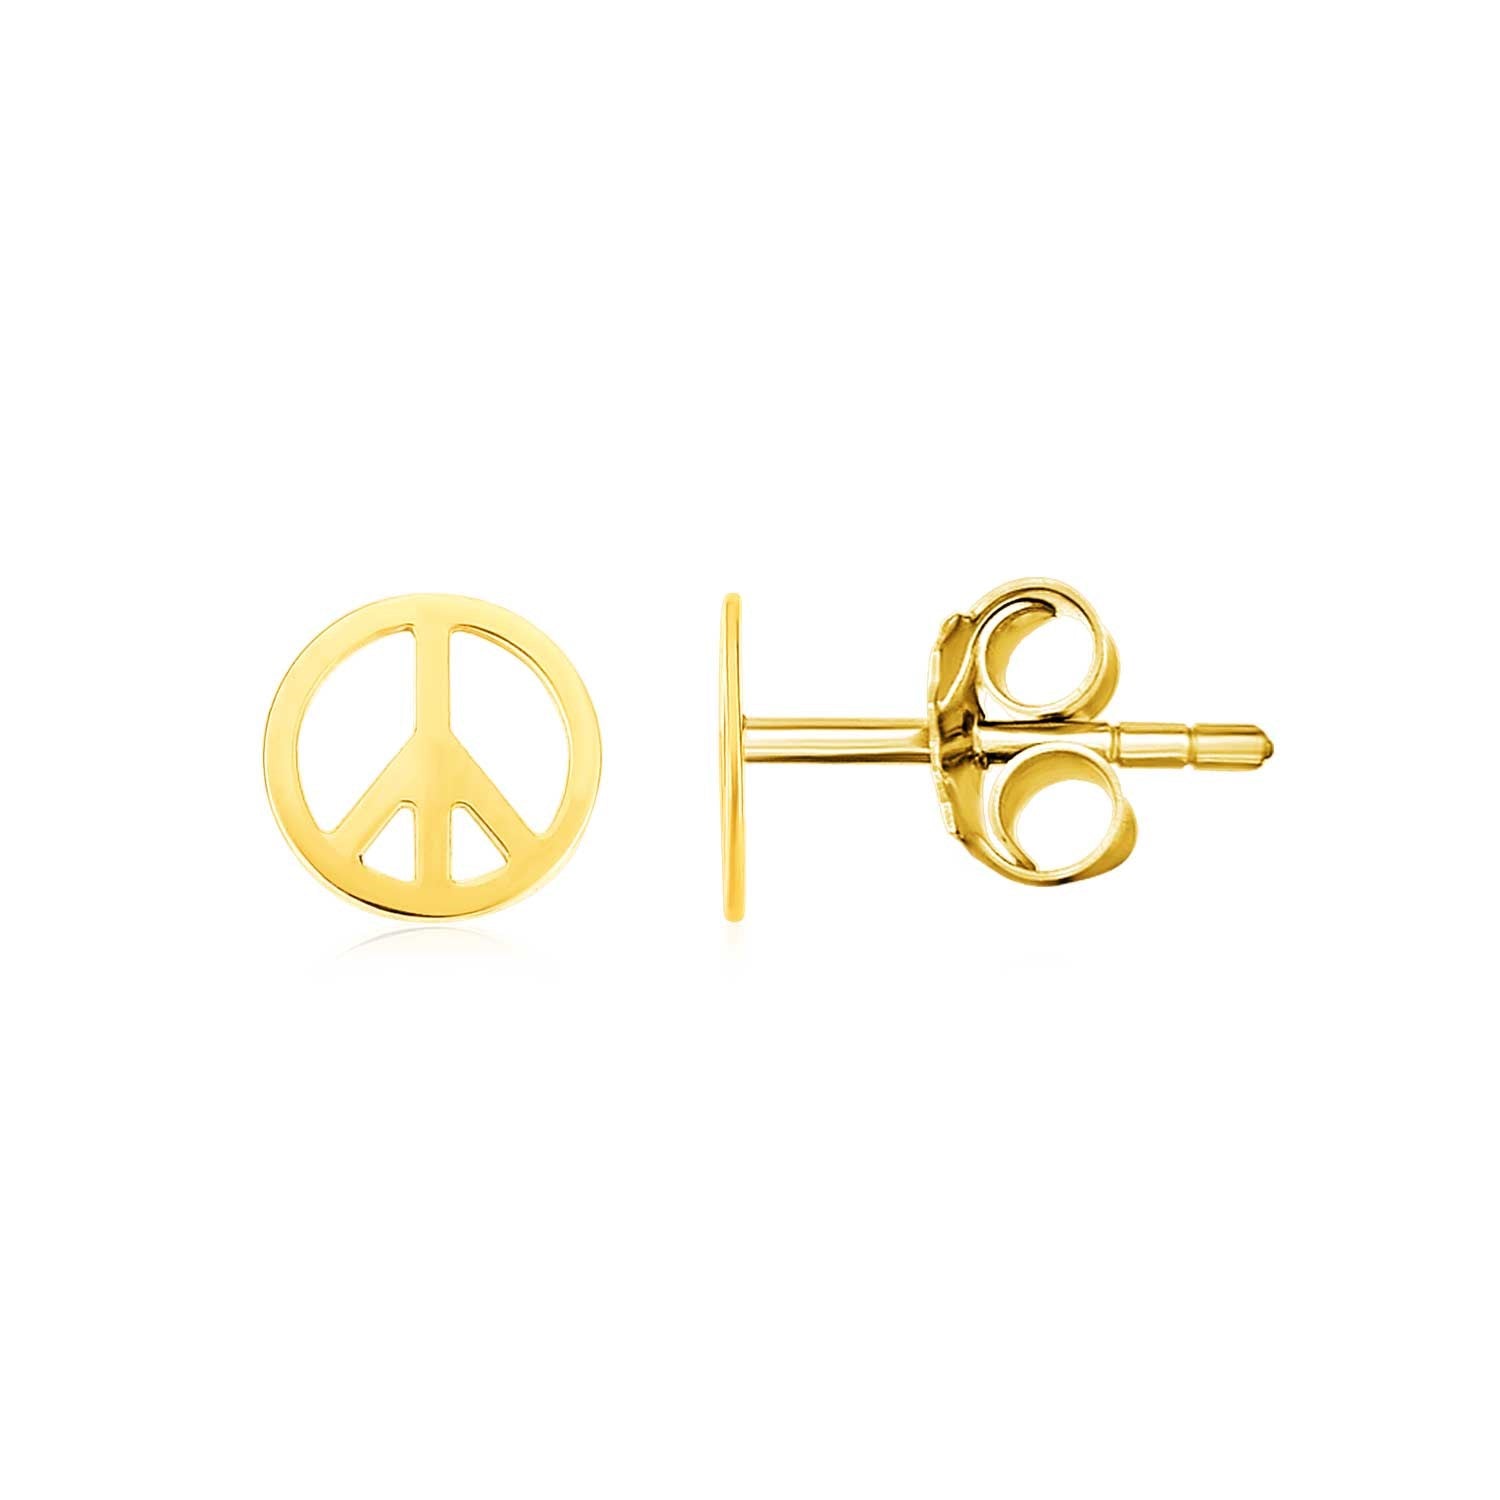 14k Yellow Gold Post Earrings with Peace Signs